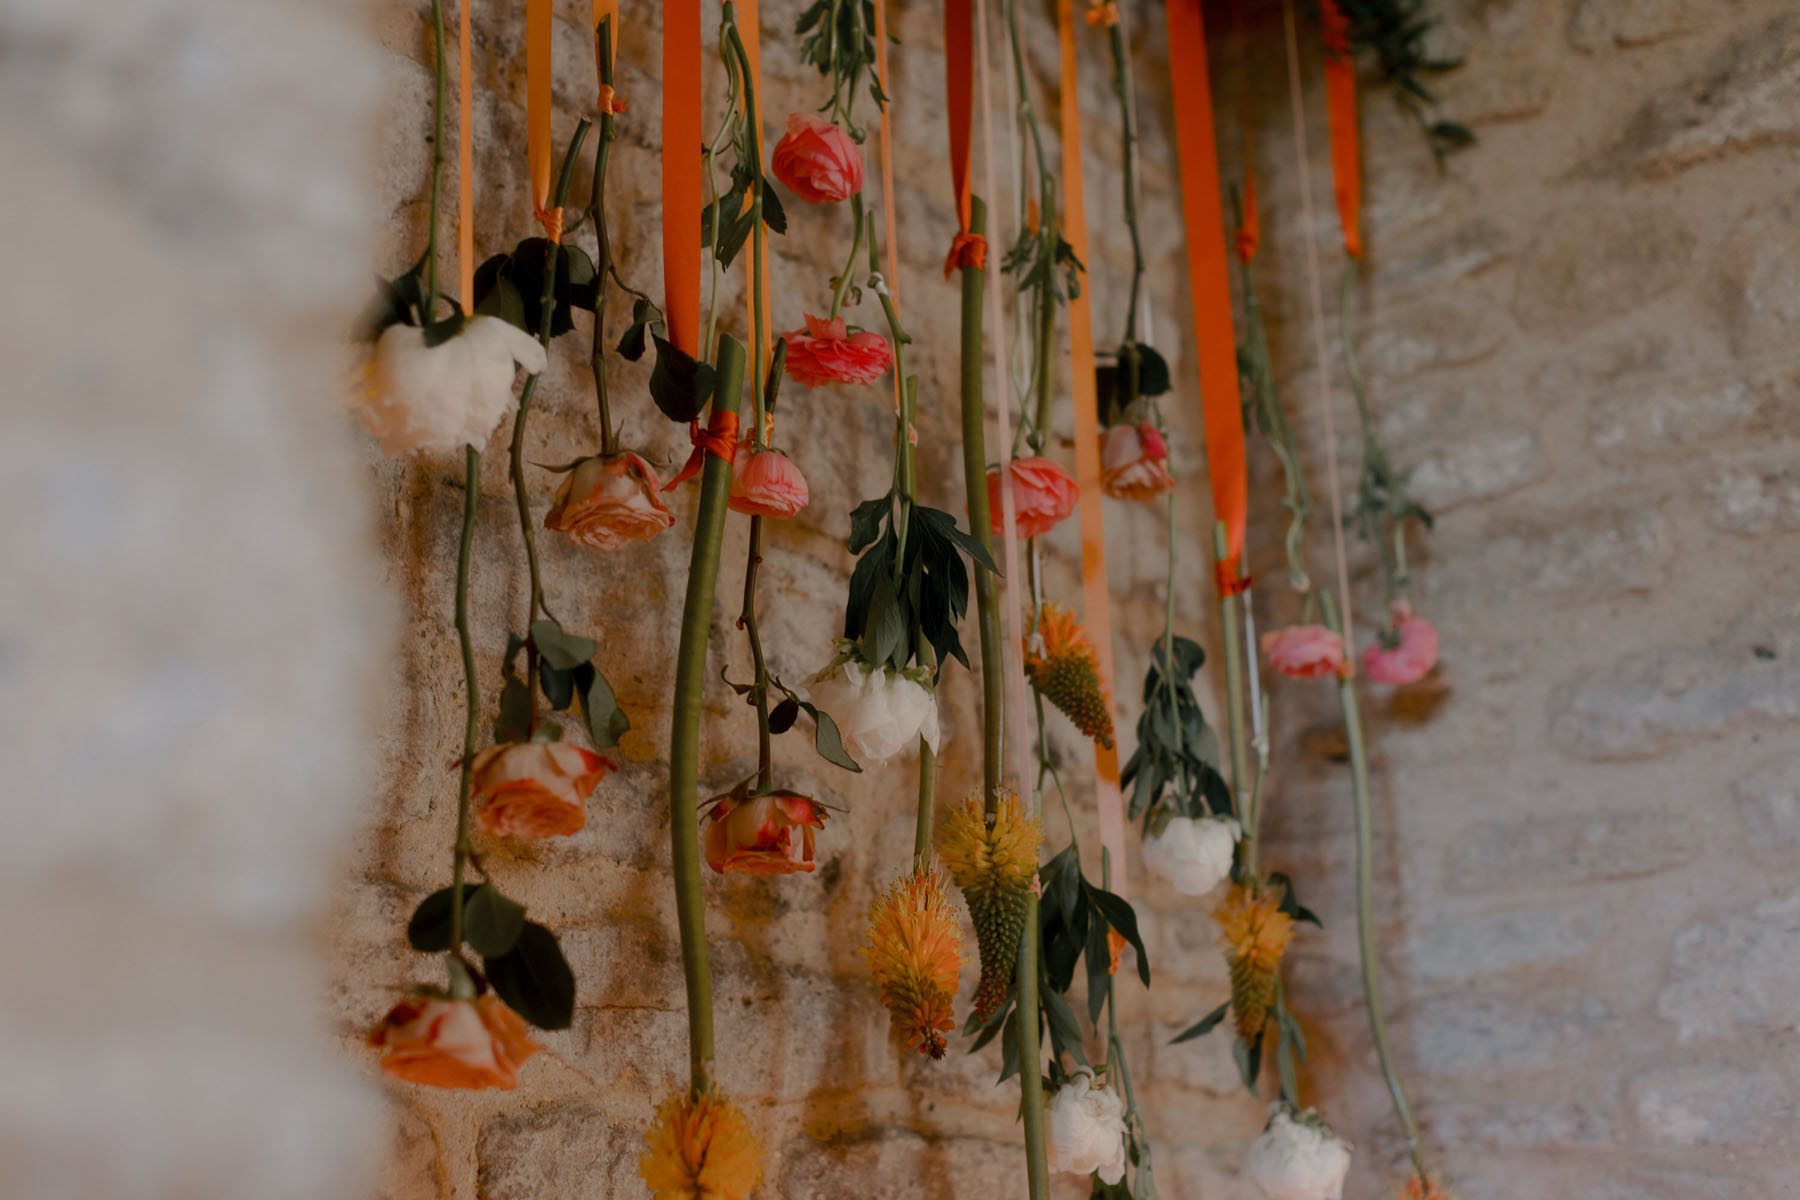 Colourful orange flowers hanging from ribbons at a wedding reception.